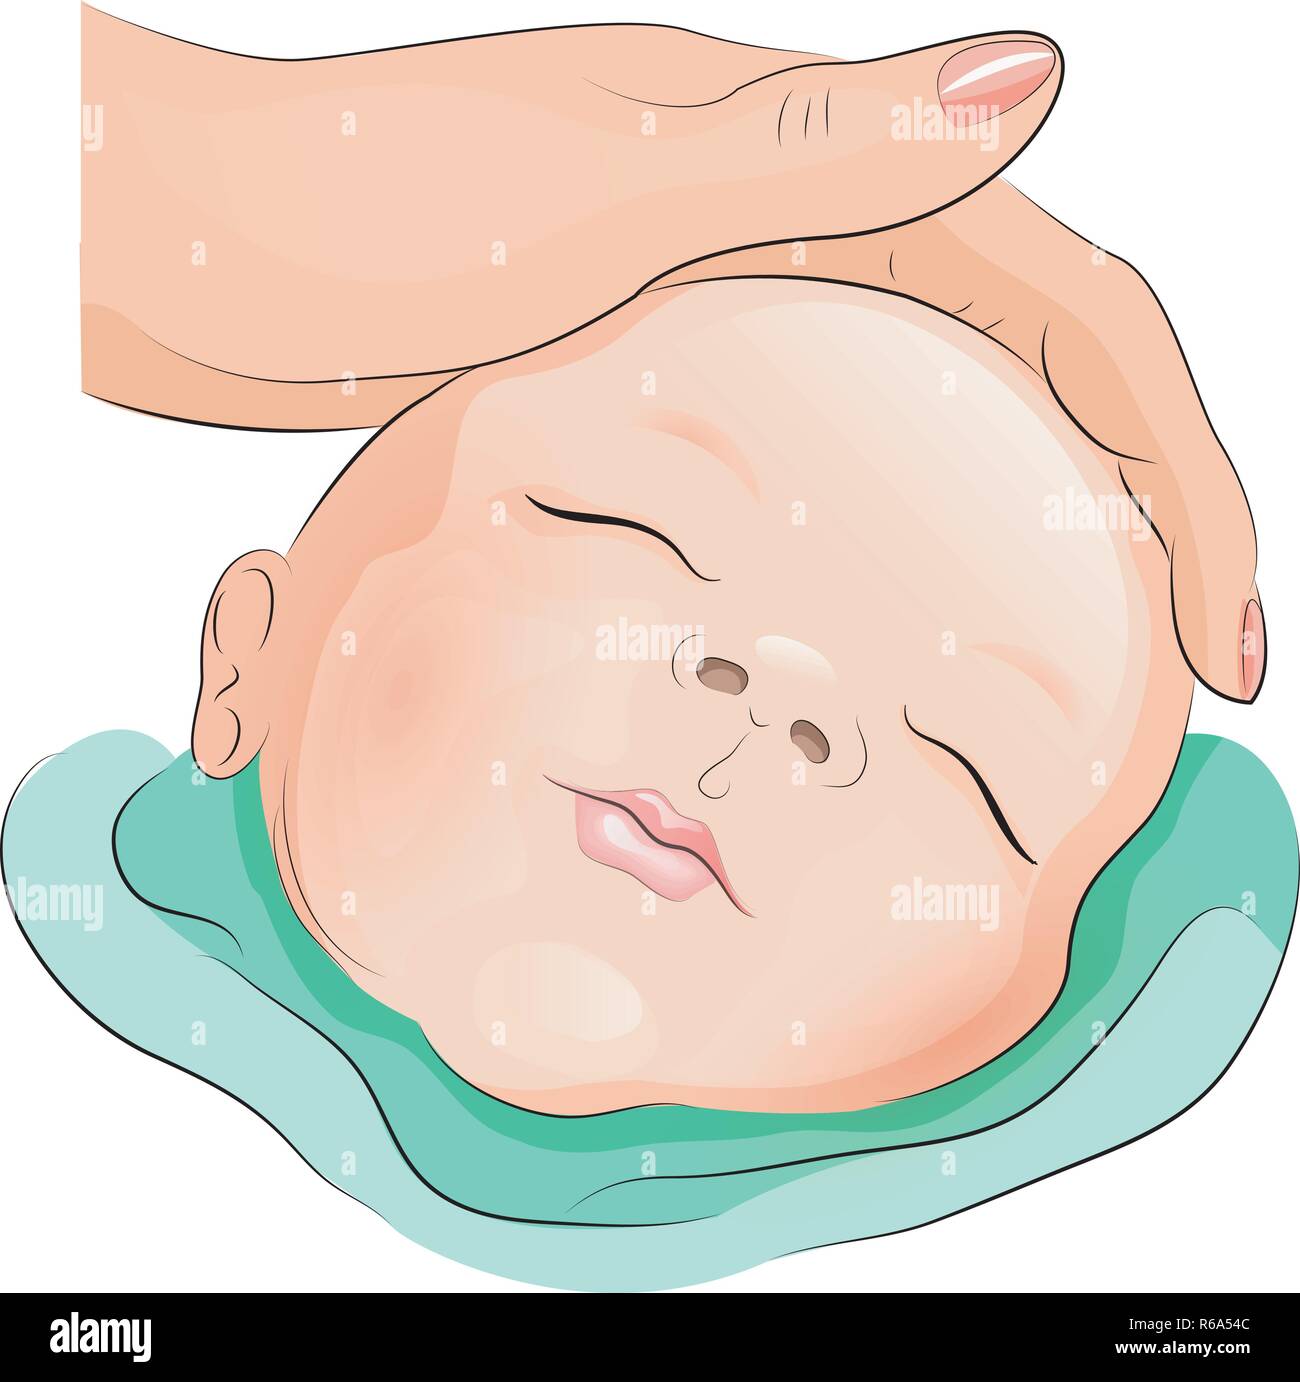 illustration of a sleeping baby and hand the mom pats him on the head Stock Vector